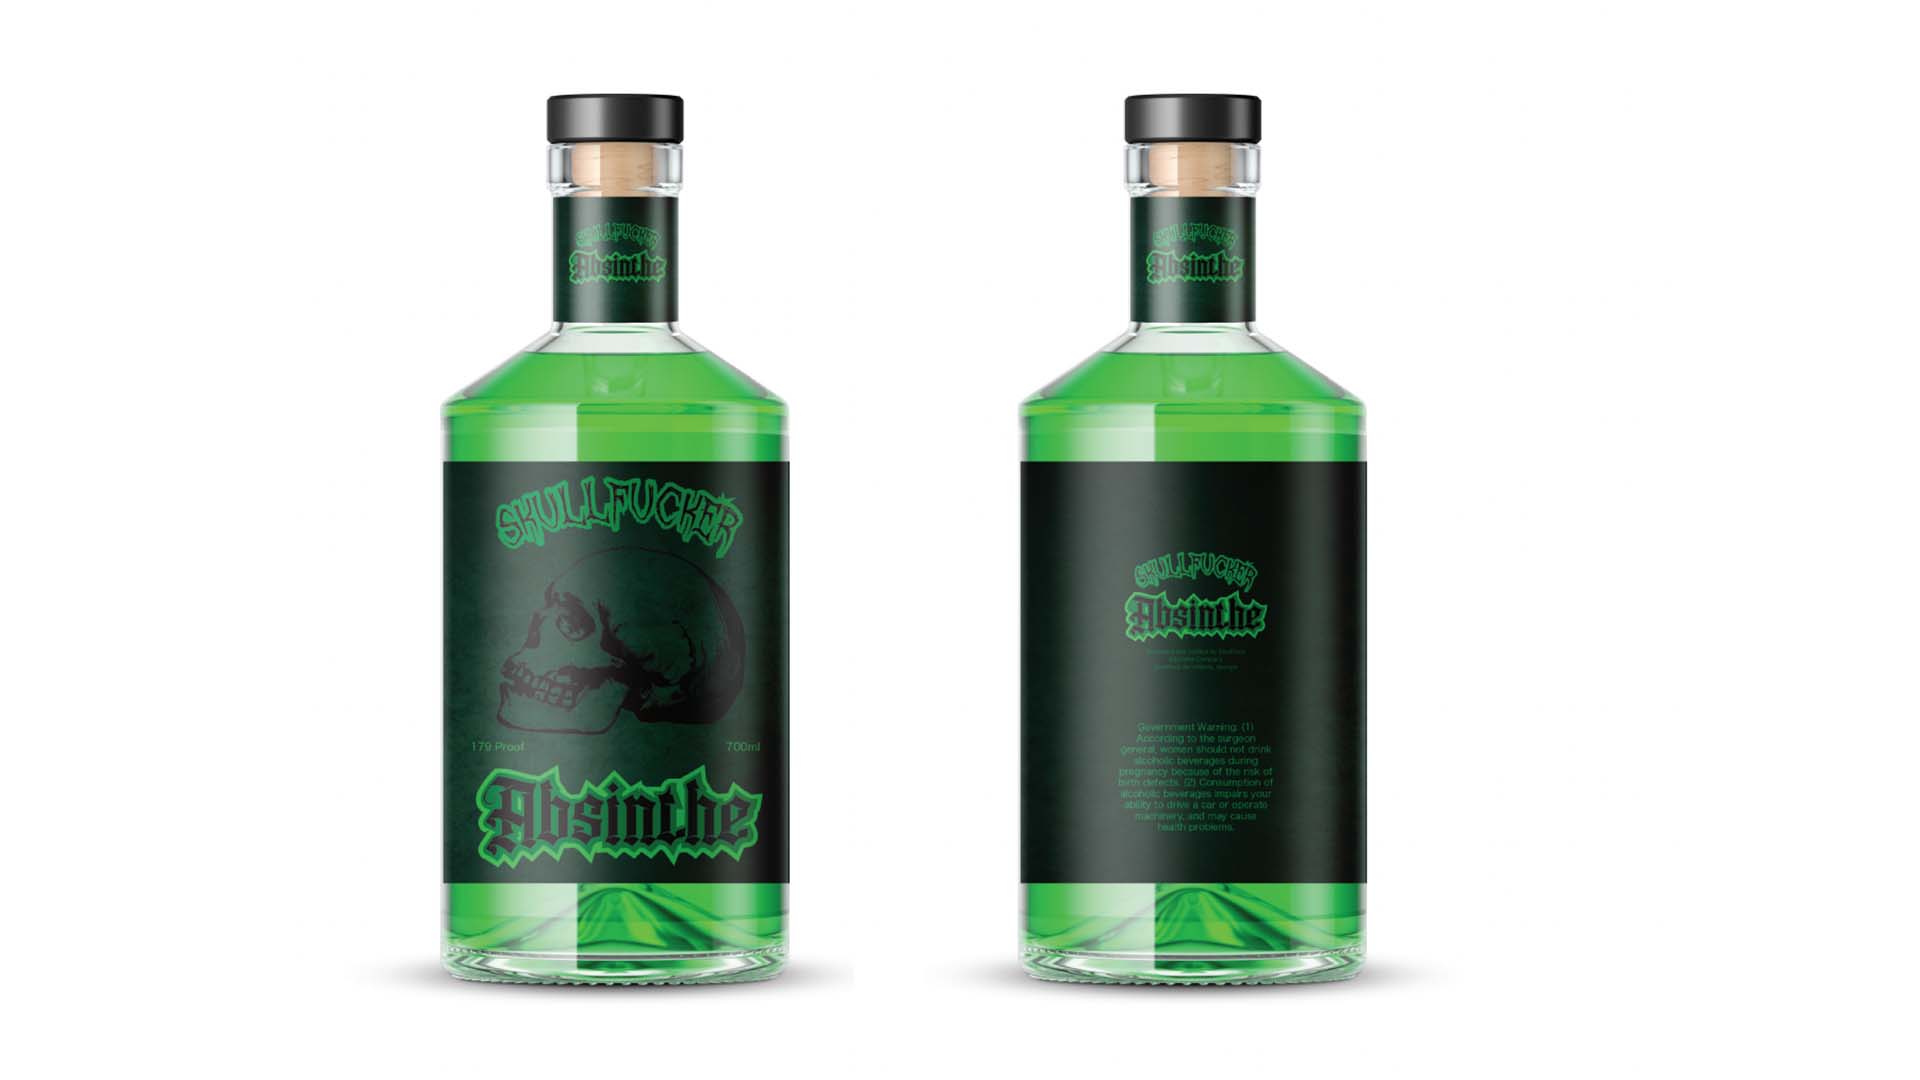  / Glass Bottle Label - 4” by 8”. Completed in 2021. Designed for print. I designed a label for an imaginary alcohol brand. The liquor for the label is absinthe, and I wanted the label to portray how strong this particular alcohol is. I designed the label with a bottle of poison in mind; a black and green color scheme with skull imagery. 